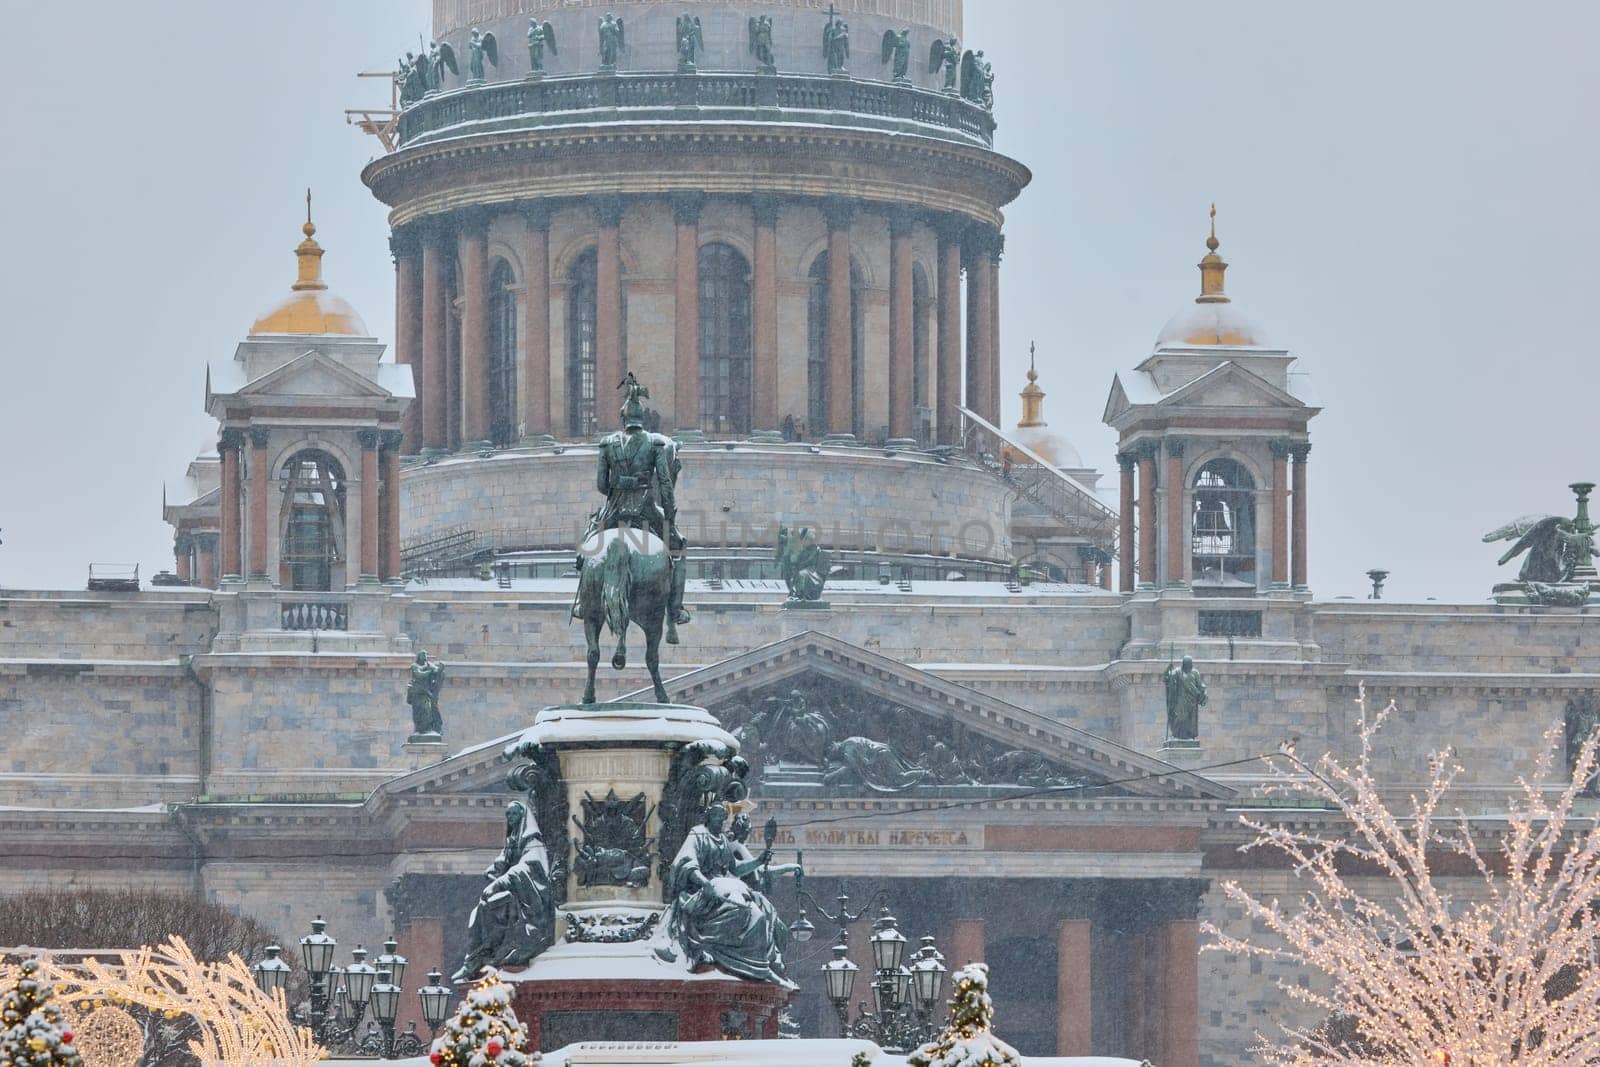 Colonnade of St. Isaac Cathedral and the monument to Emperor Nicholas II during snowstorm in St. Petersburg - Russia. High quality photo